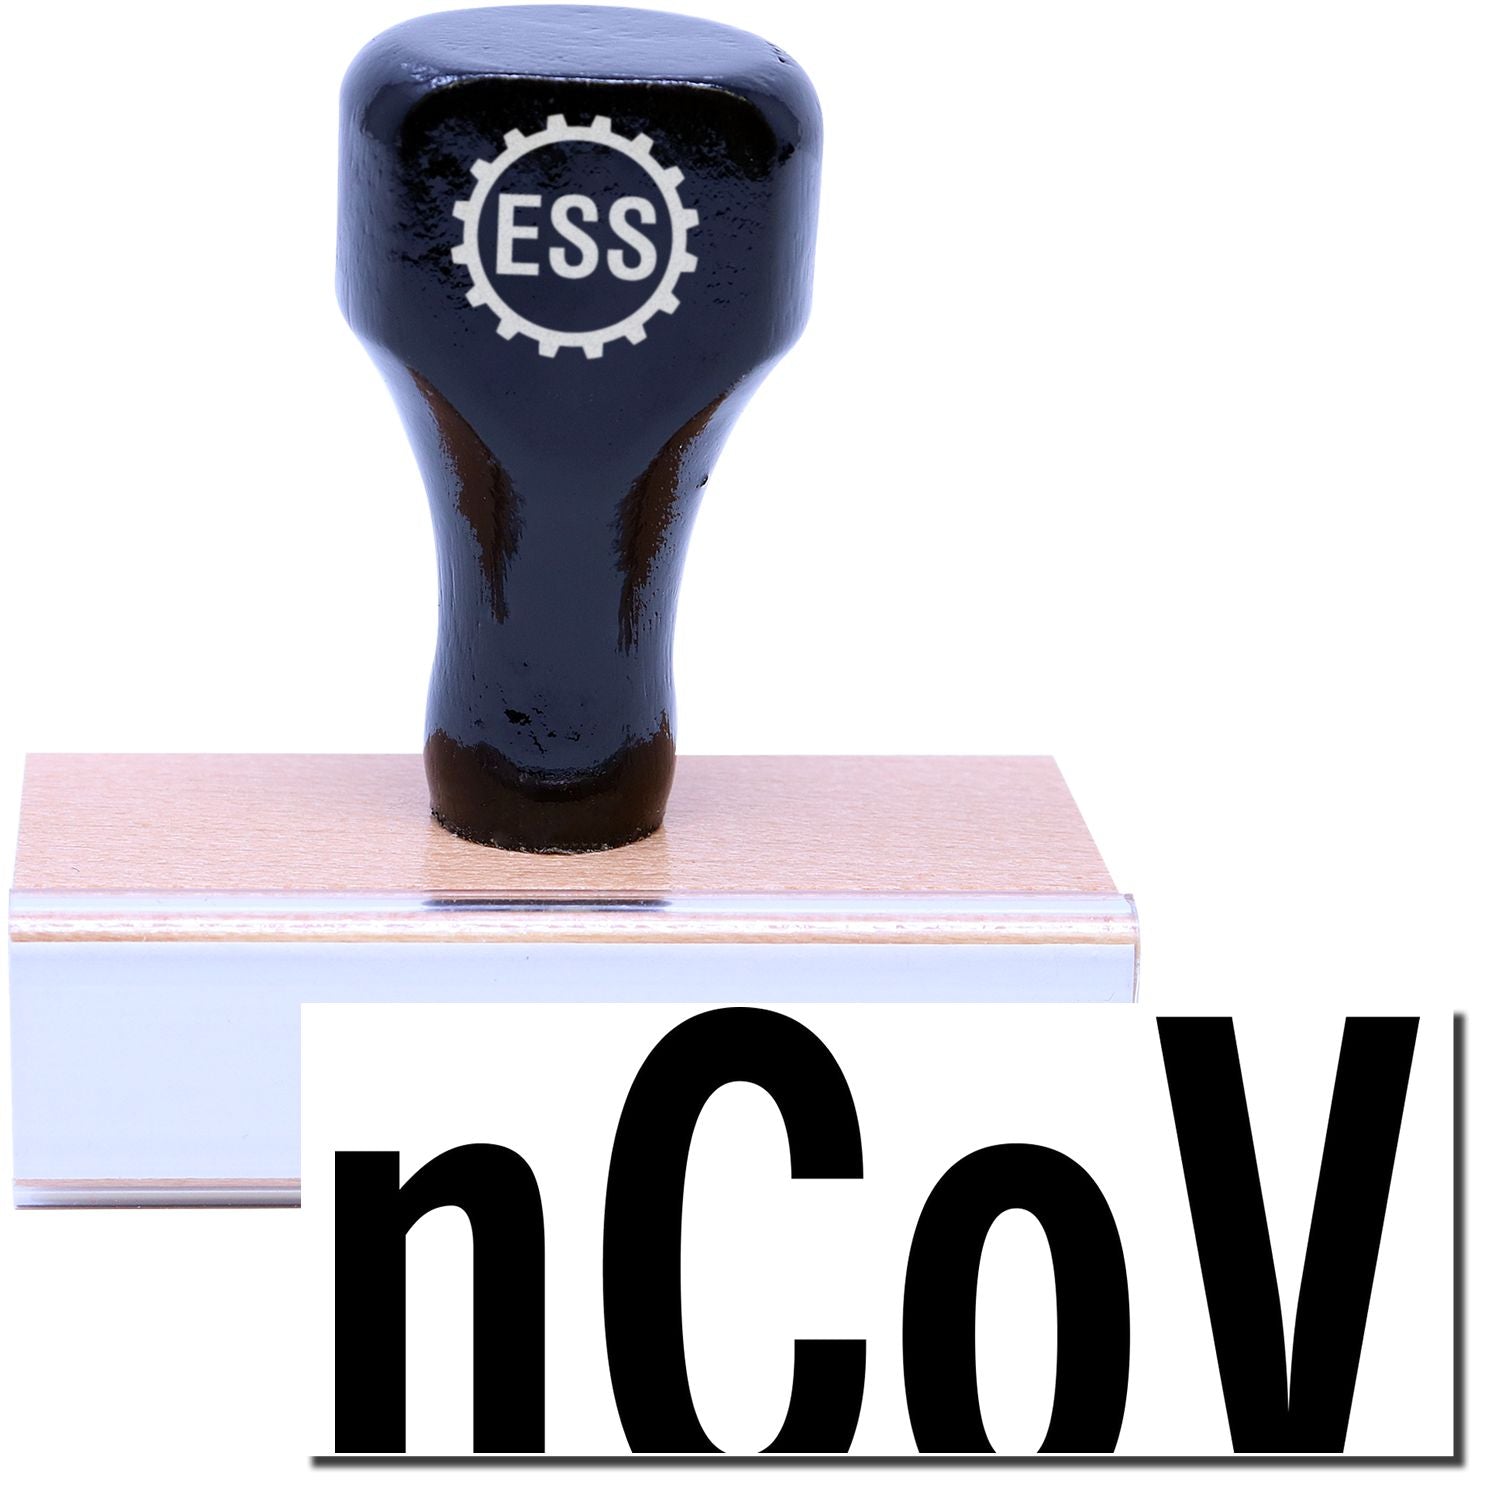 A stock office rubber stamp with a stamped image showing how the text "nCoV" is displayed after stamping.